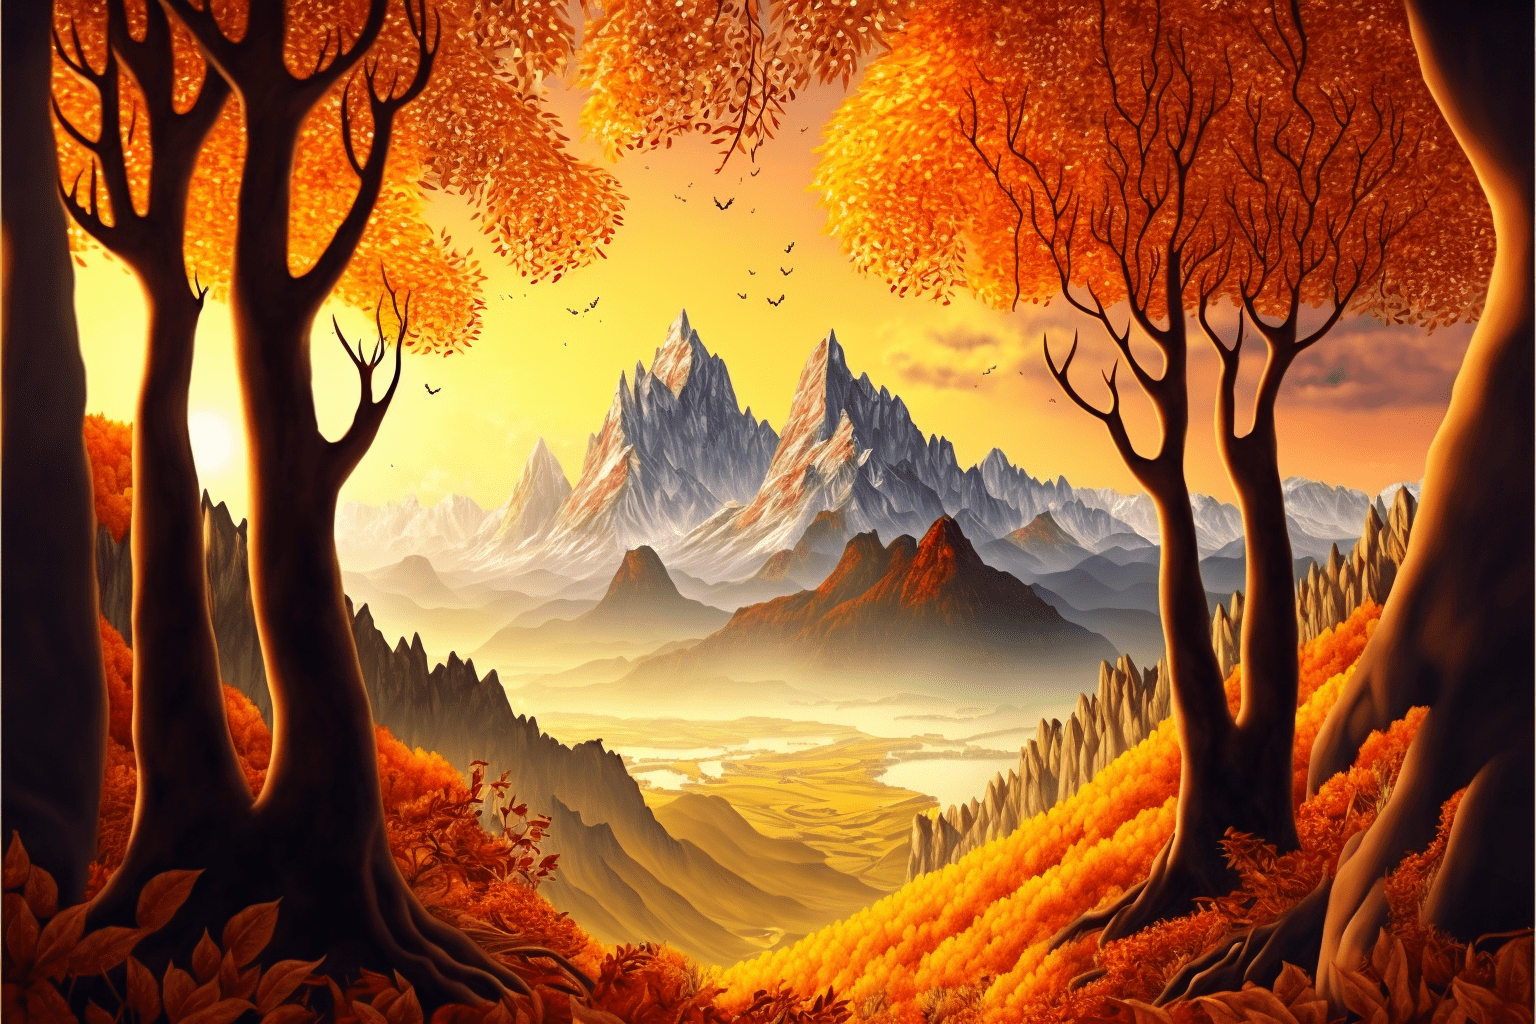 adventures_in_cardboard_sunny_magic_autumn_valley_surrounded_by_74205065-94bc-4364-8c05-5ba583f49e88